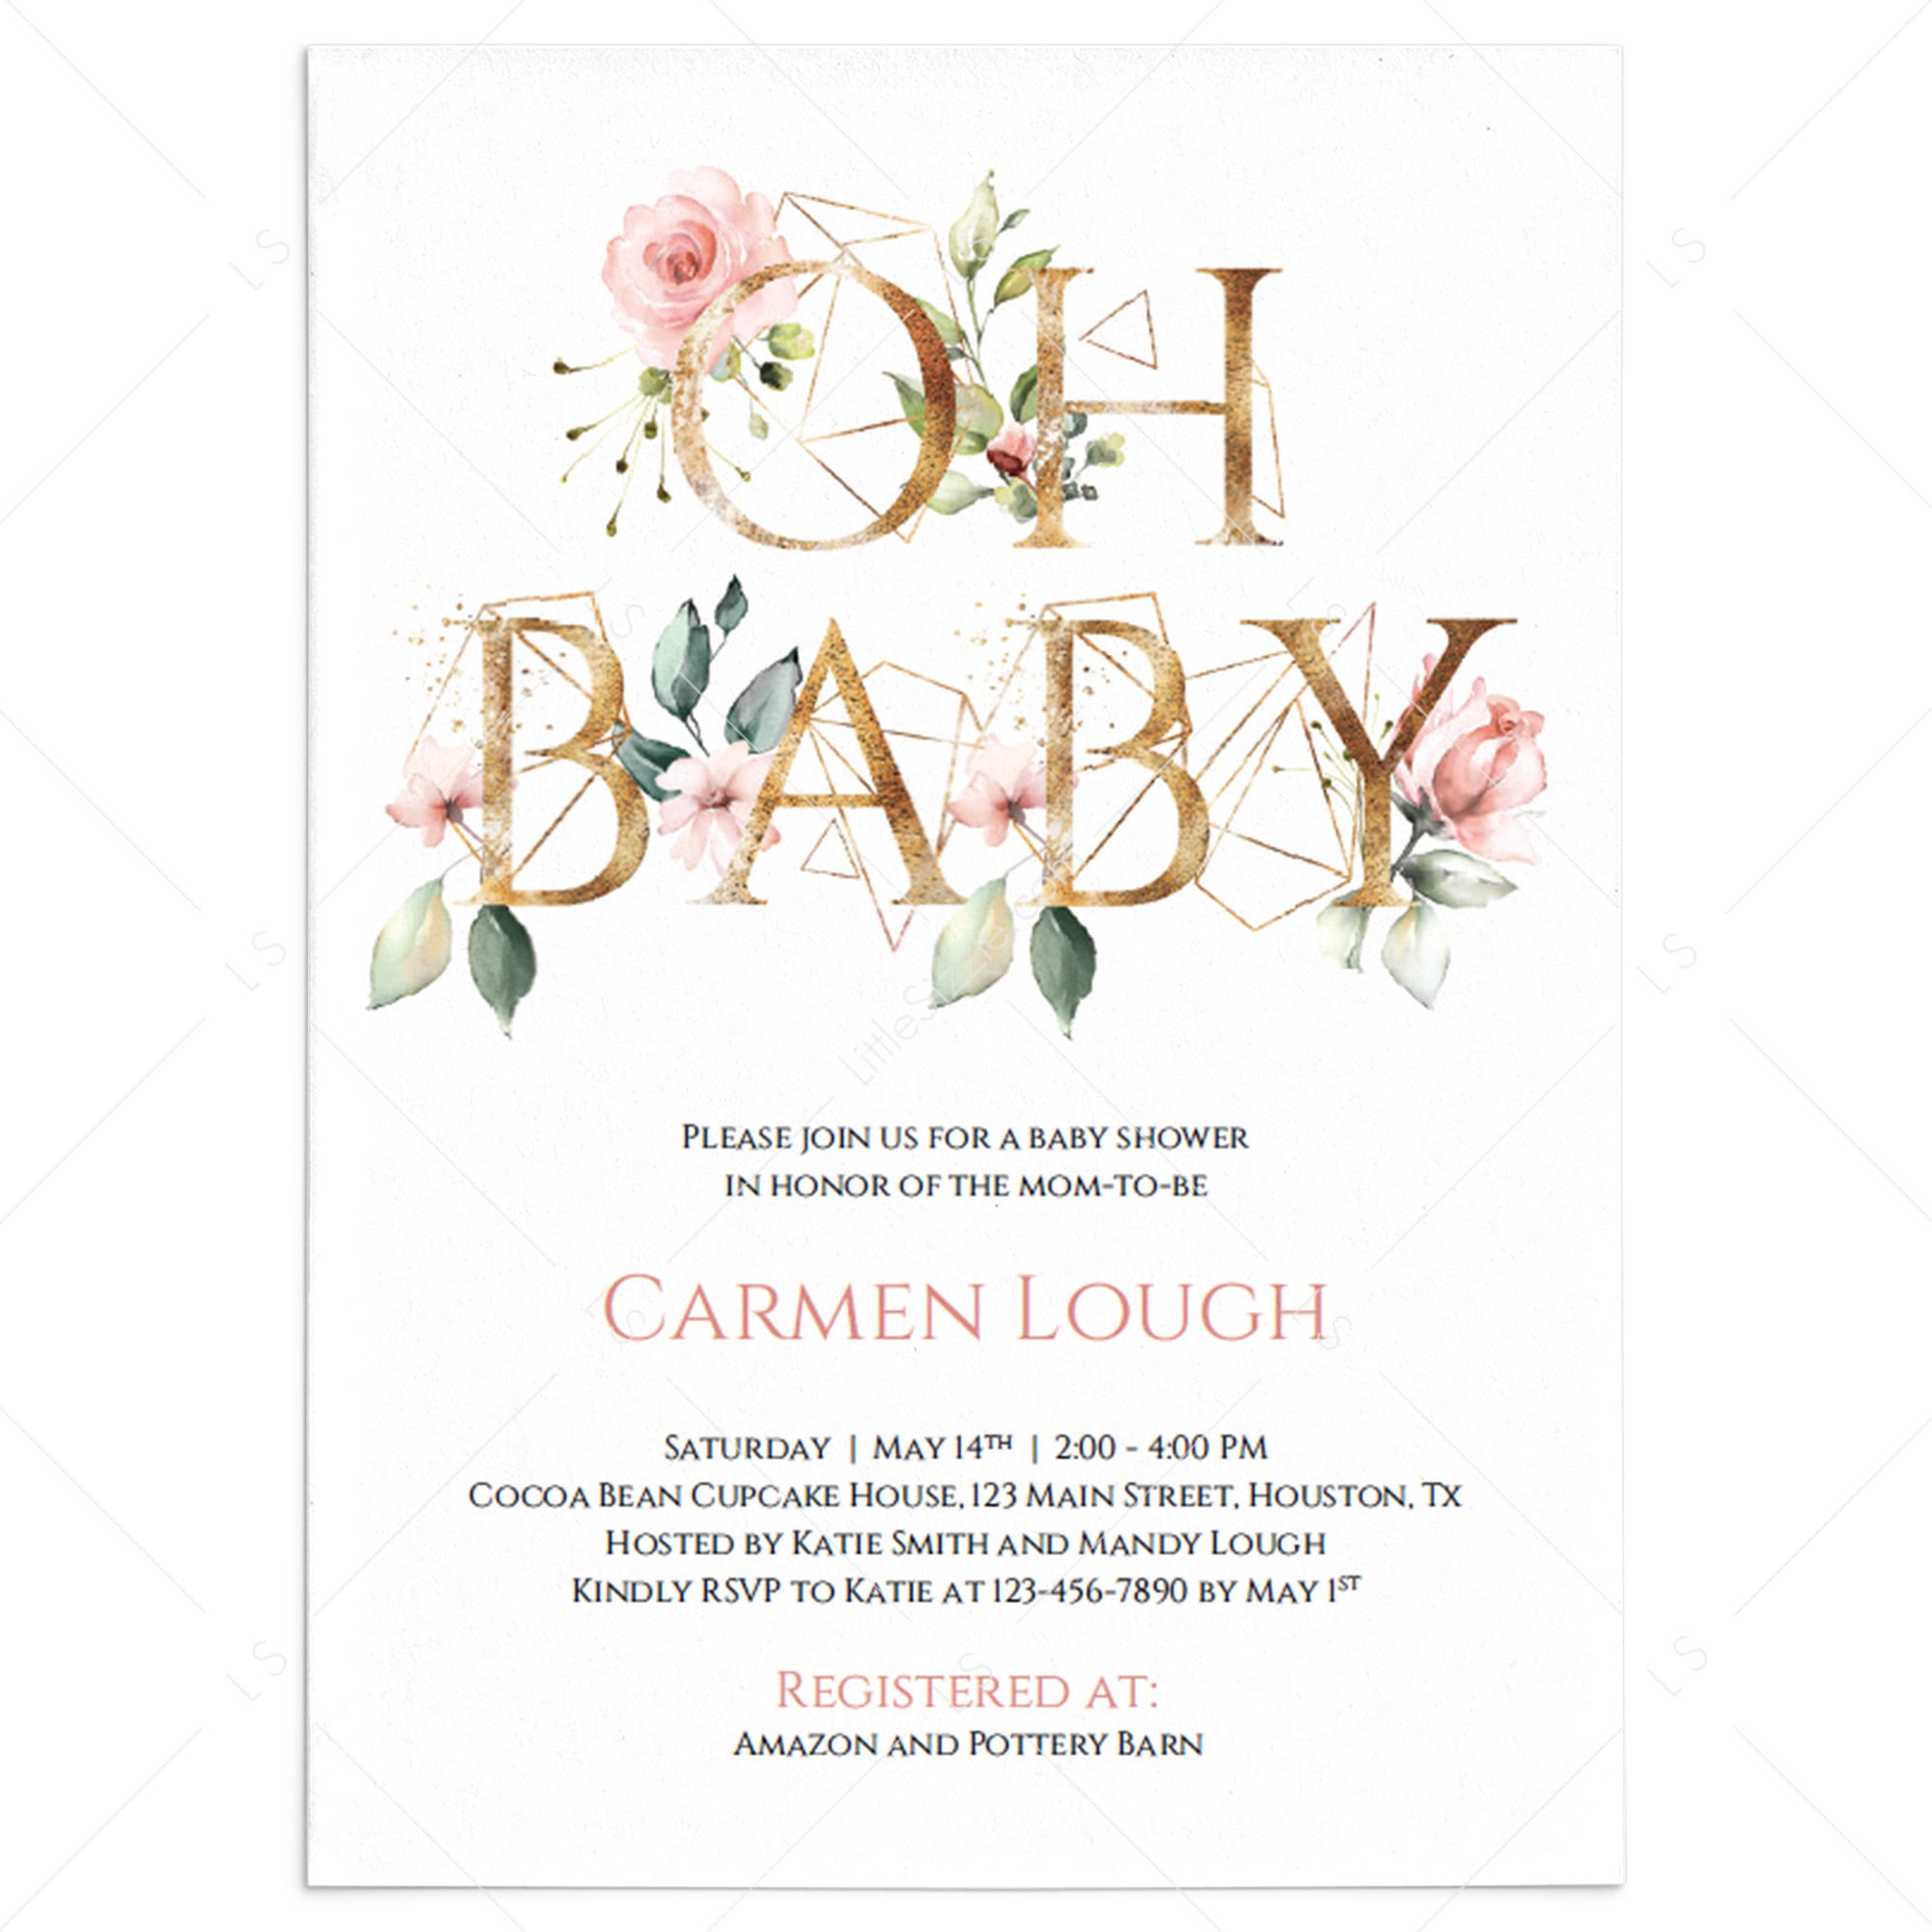 Gold floral pink and green oh baby invitation for girl baby shower by Littlesizzle